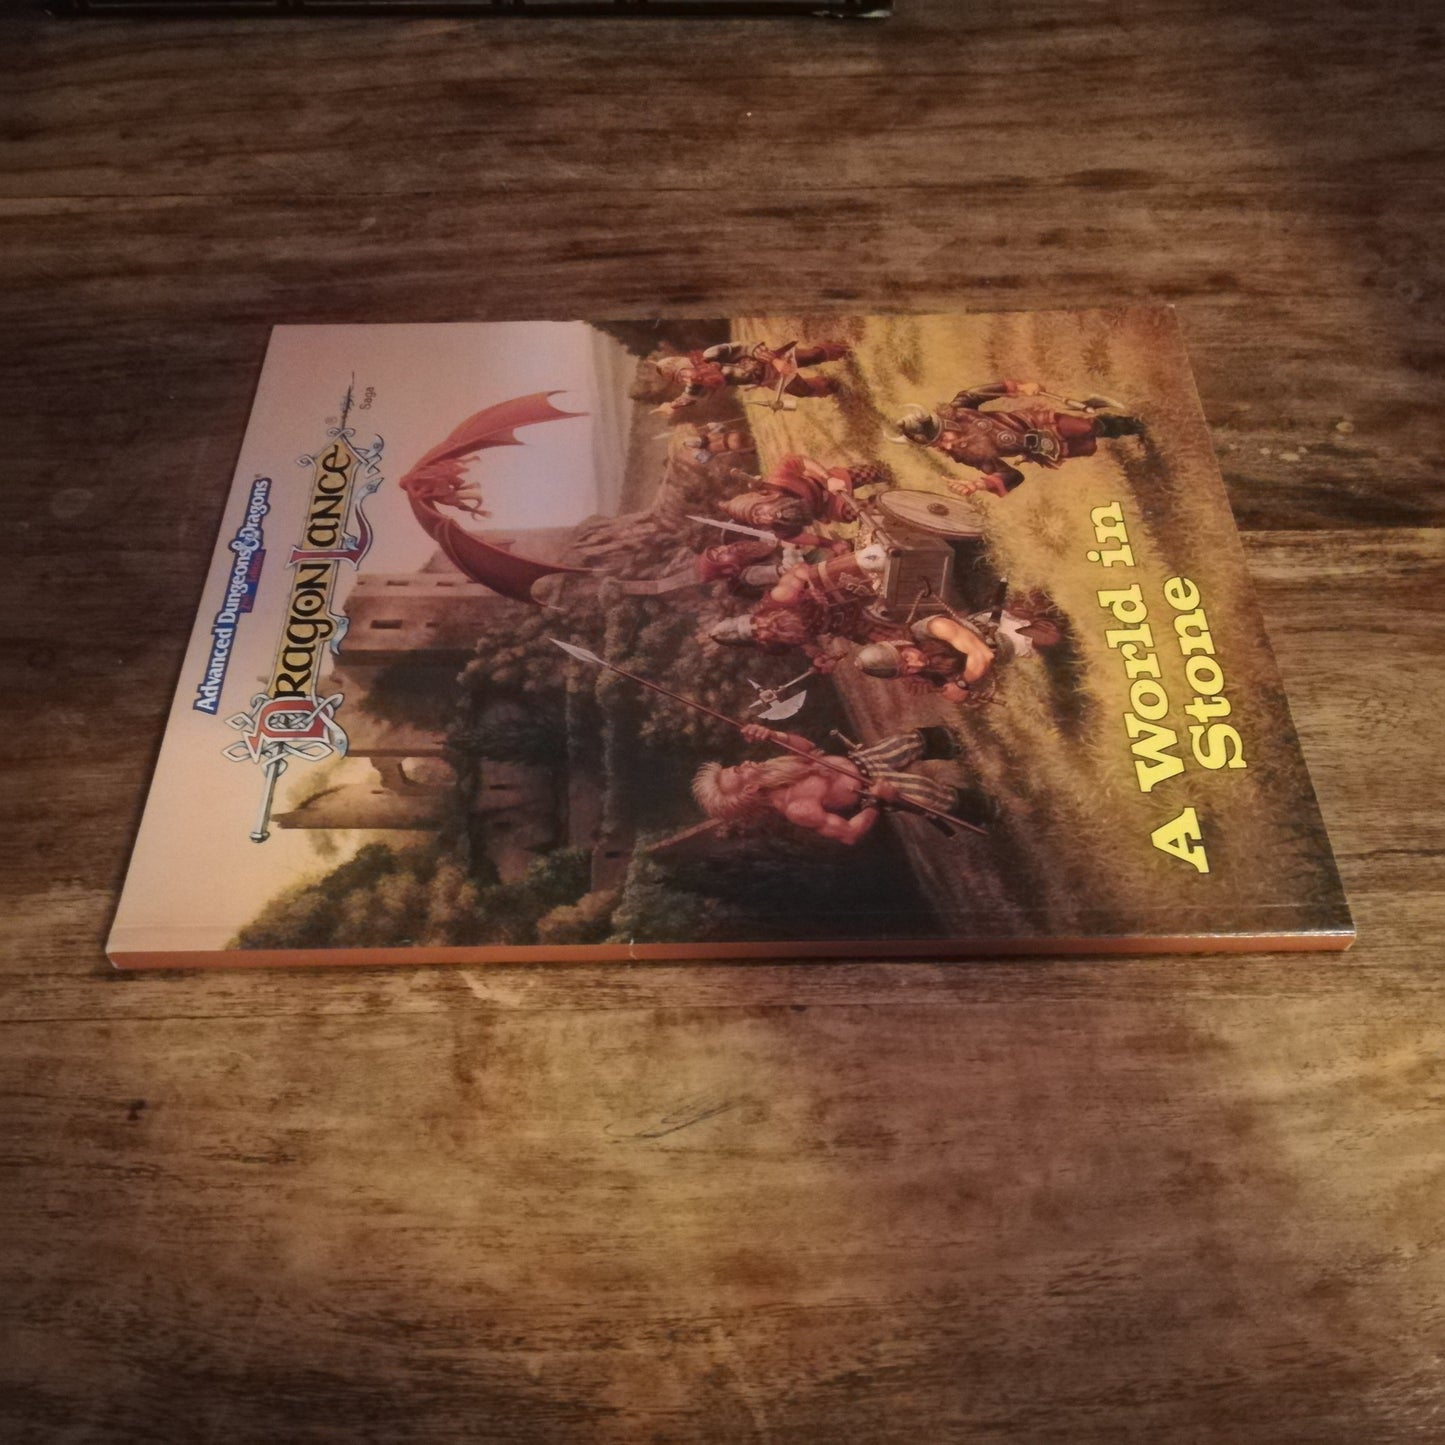 Dragonlance A World in Stone TSR AD&D 2nd Edition - AllRoleplaying.com